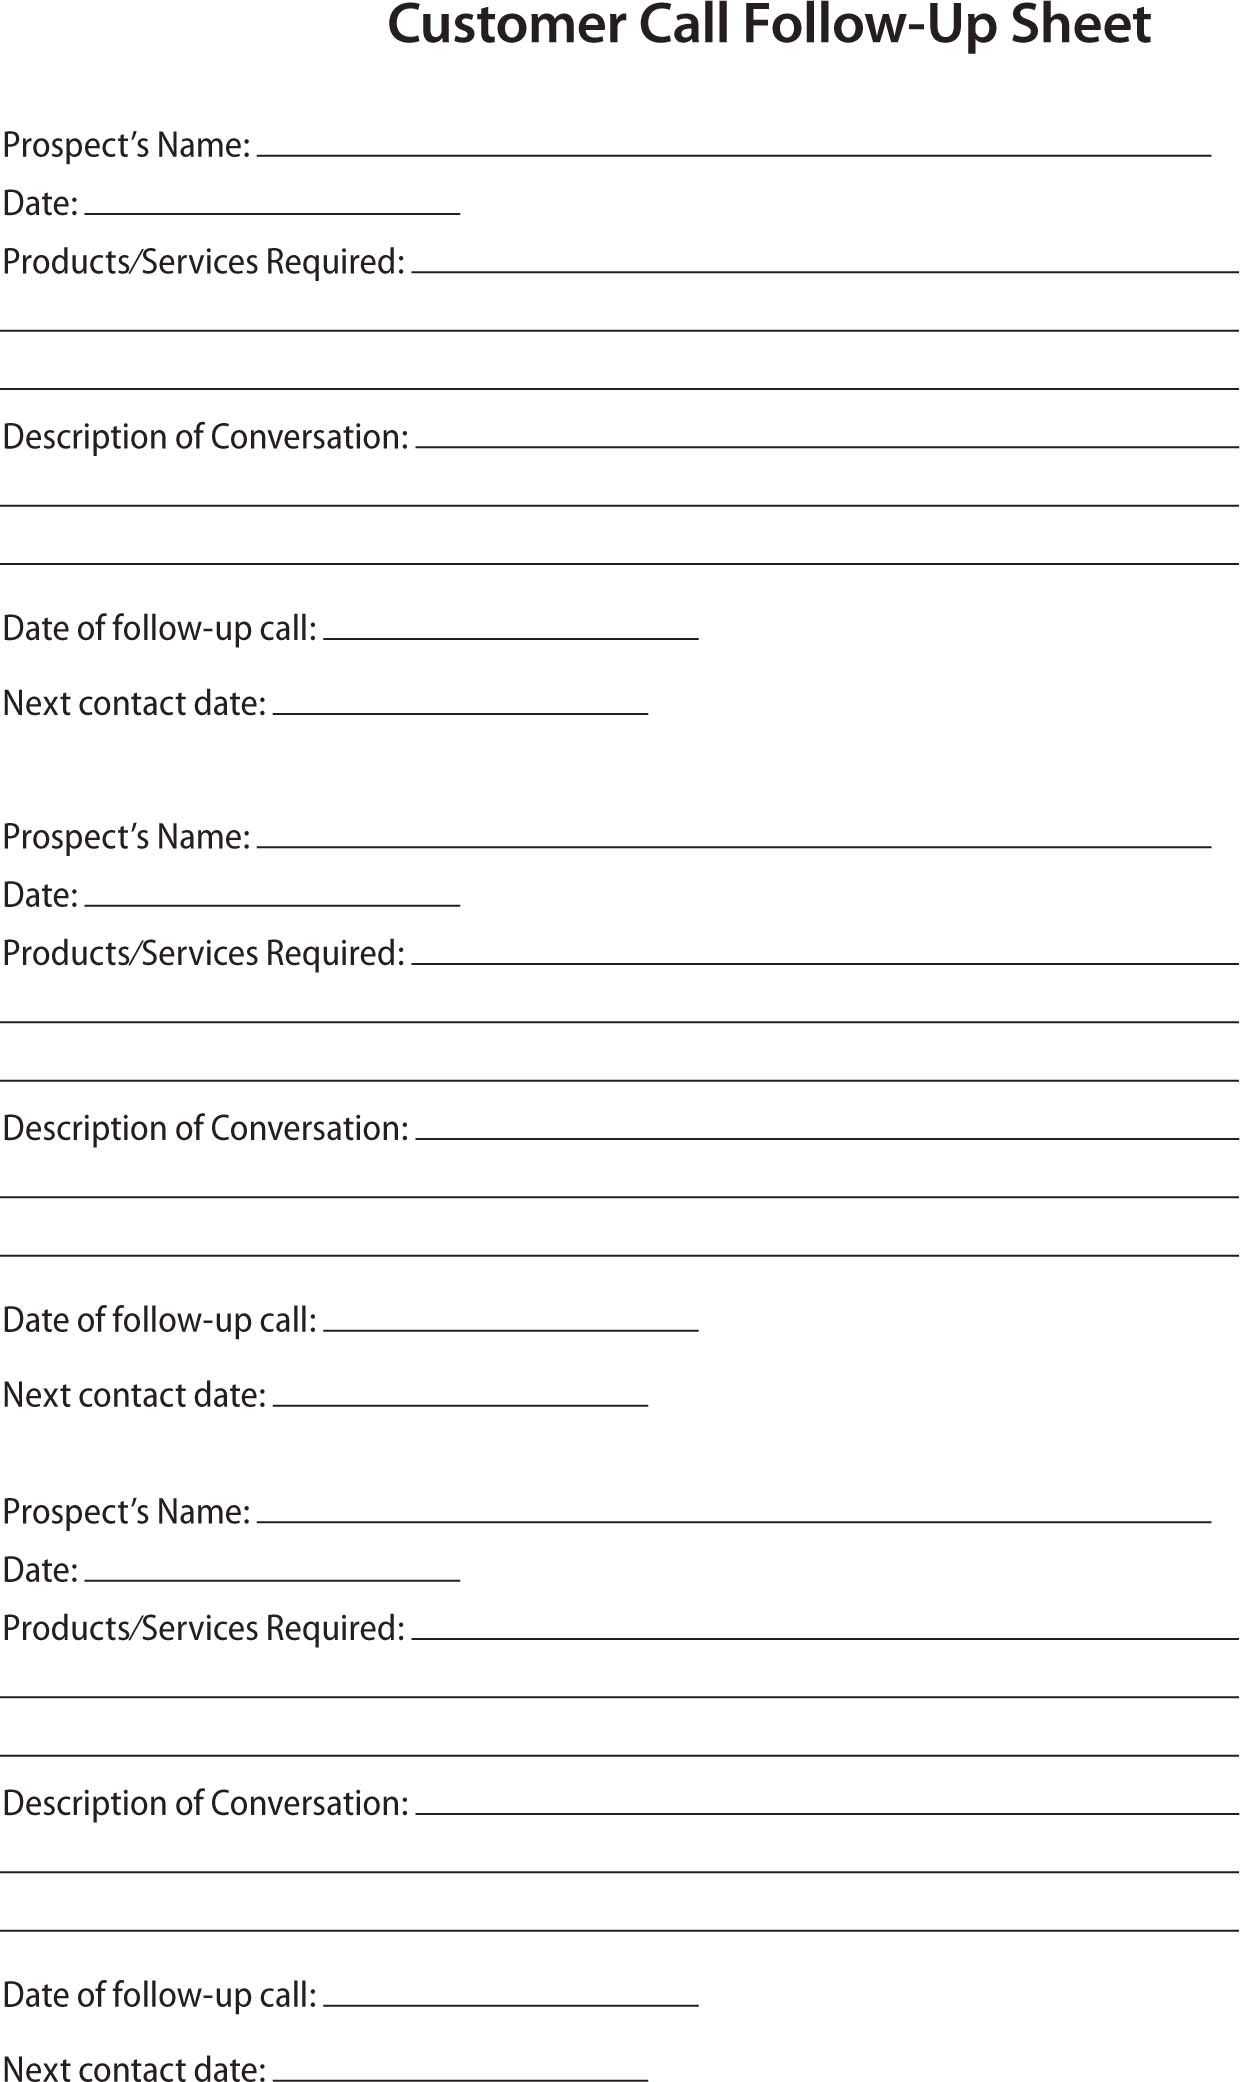 80 20 Prospect Sheet Customer Call Follow Up | Sales Report Within Customer Contact Report Template